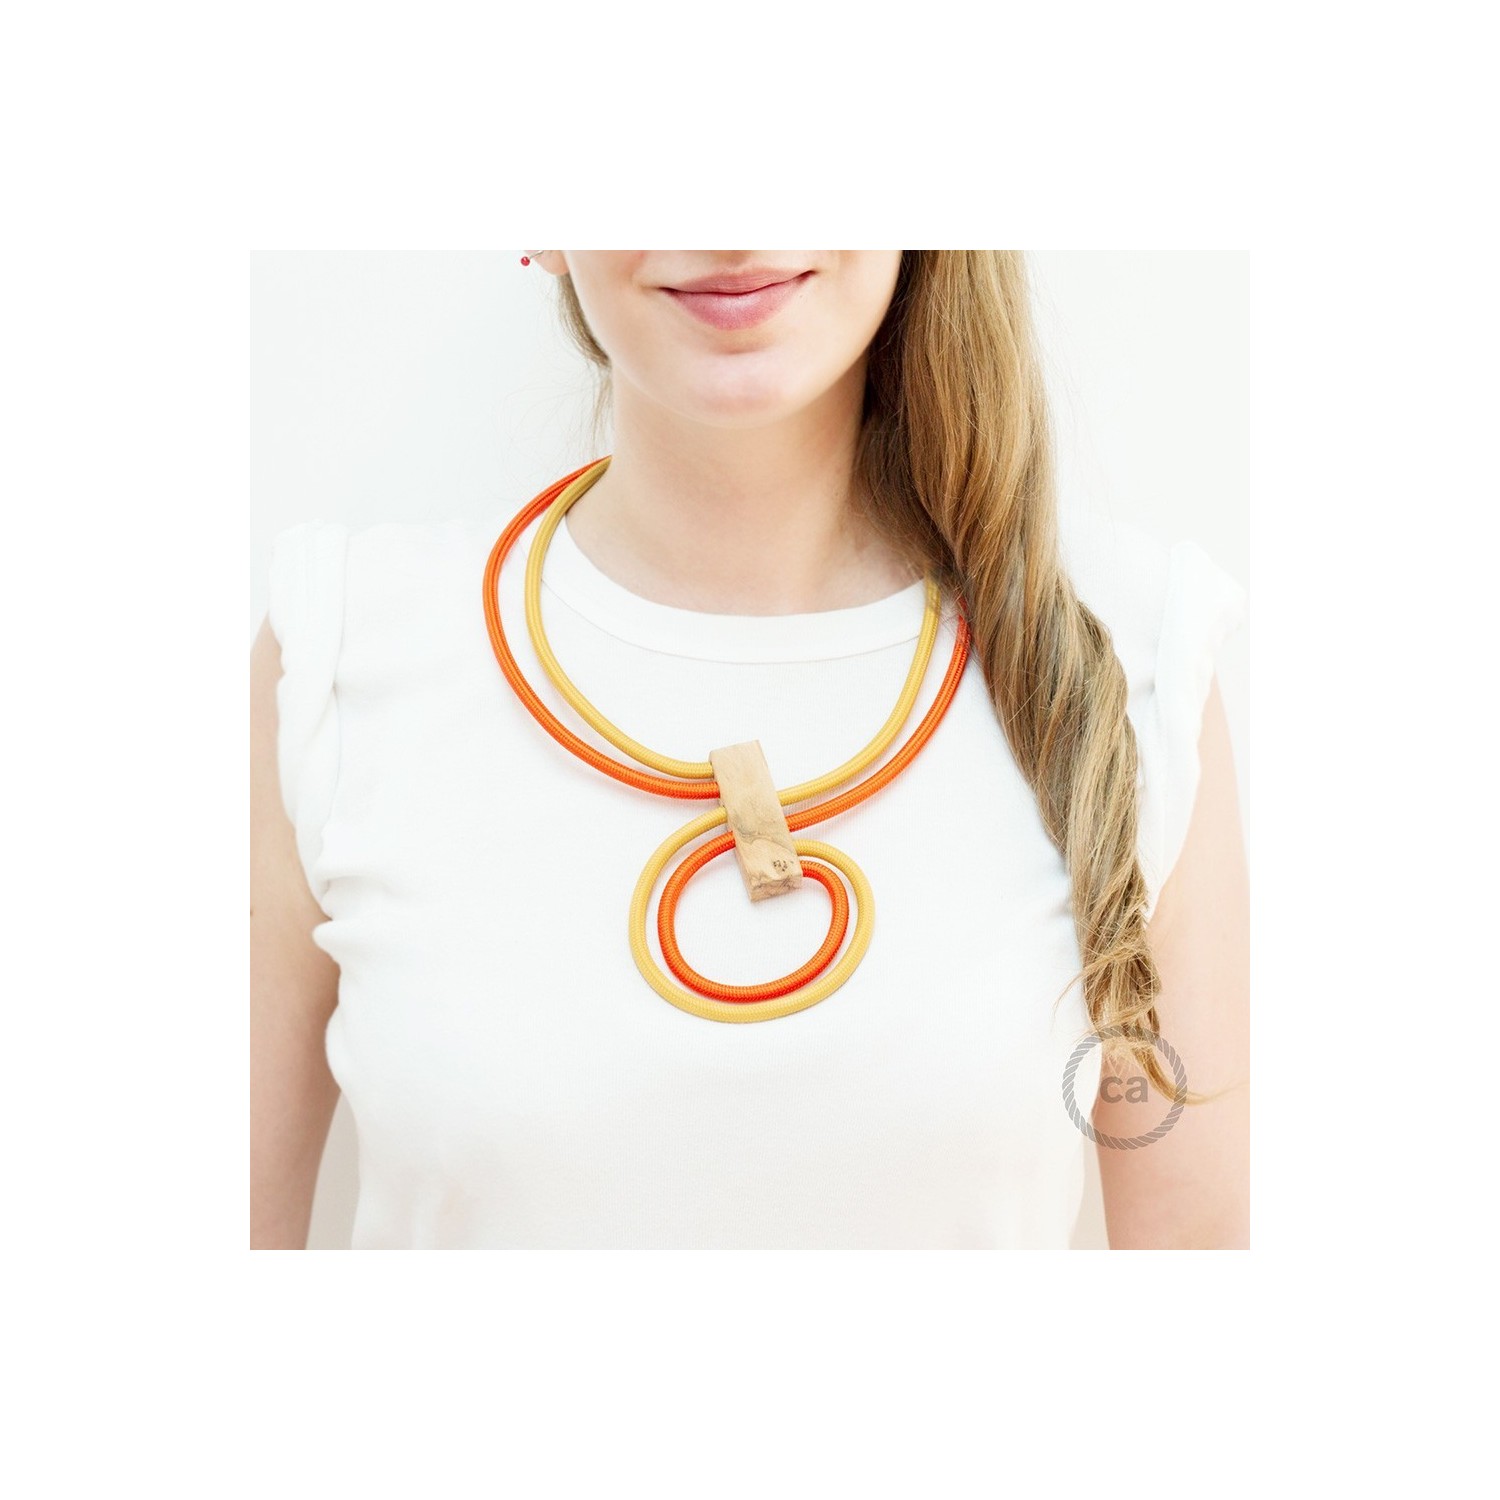 Infinity necklace adjustable bicolor Mustard RM25 and Orange RM15.